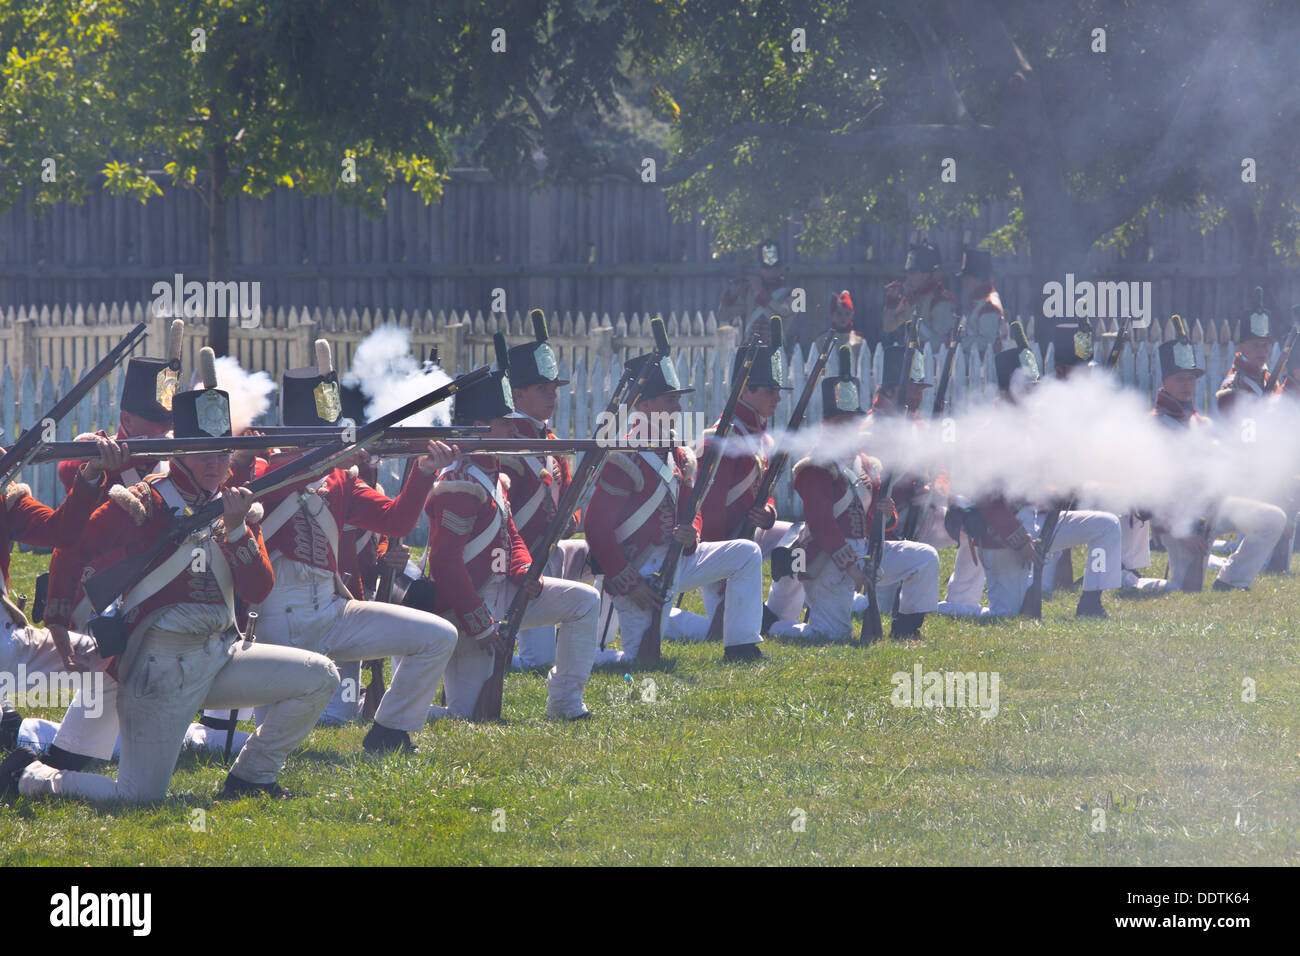 Re-enactment of War of 1812 Fort George Niagara on the Lake Ontario Canada Infantry simulating battle and firing muskets Stock Photo